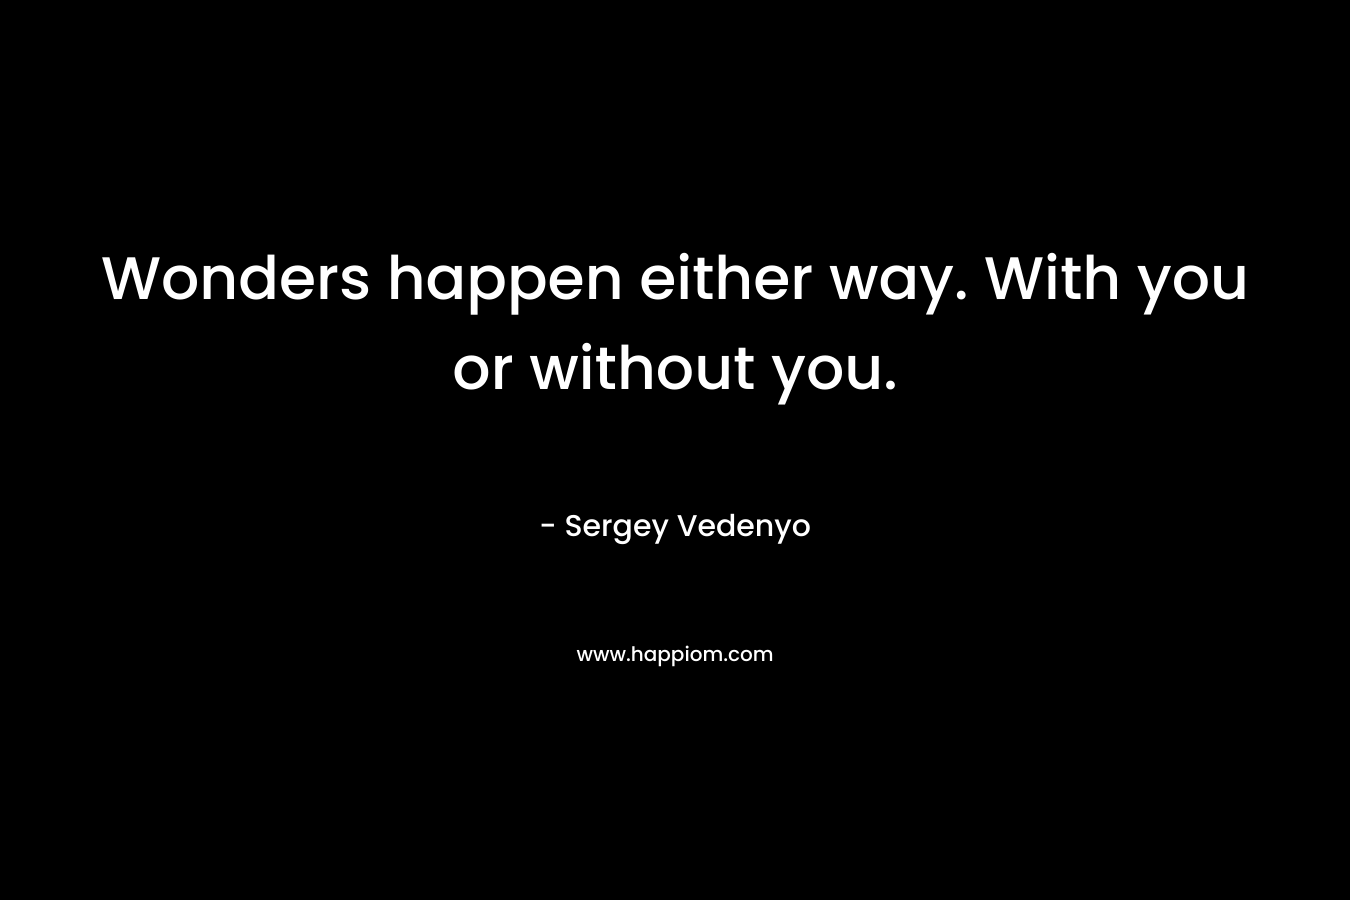 Wonders happen either way. With you or without you. – Sergey Vedenyo